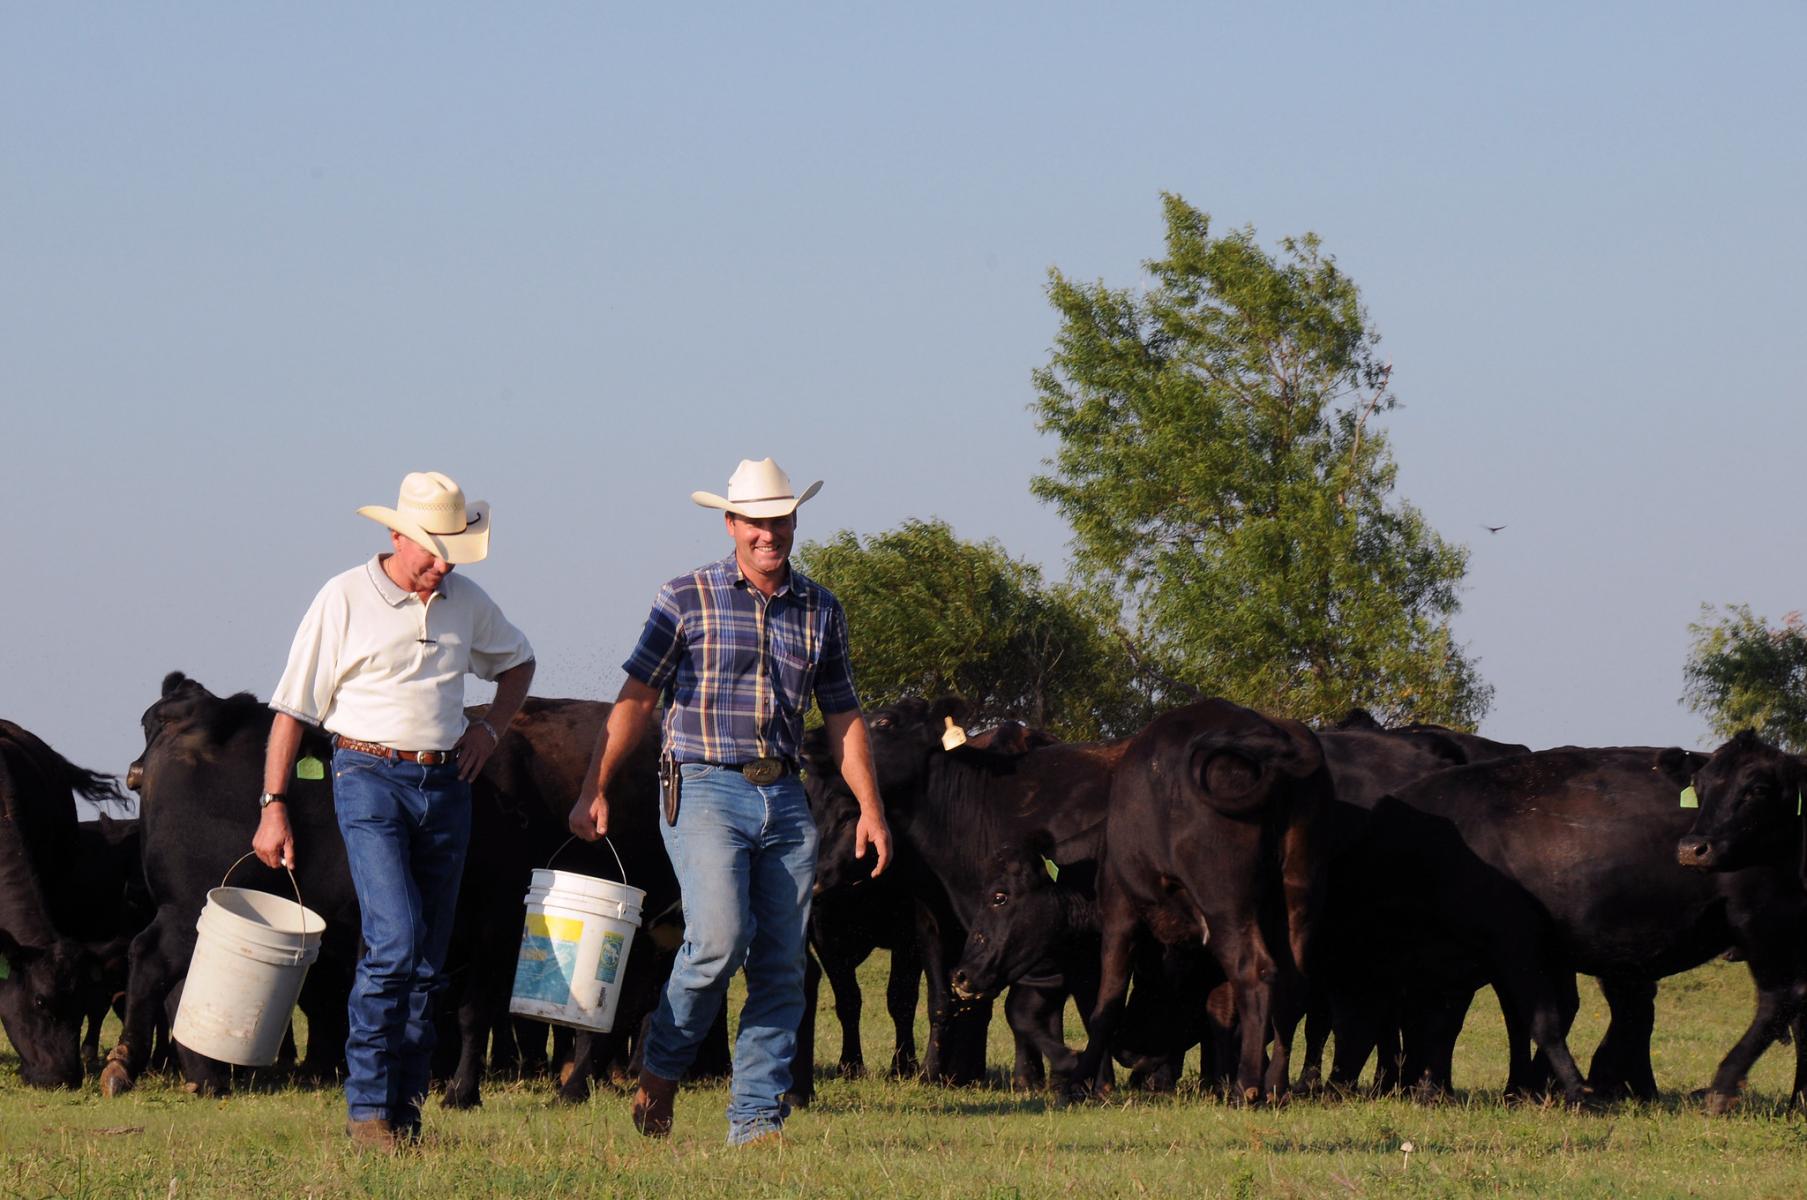 Two farmers with buckets among cattle.